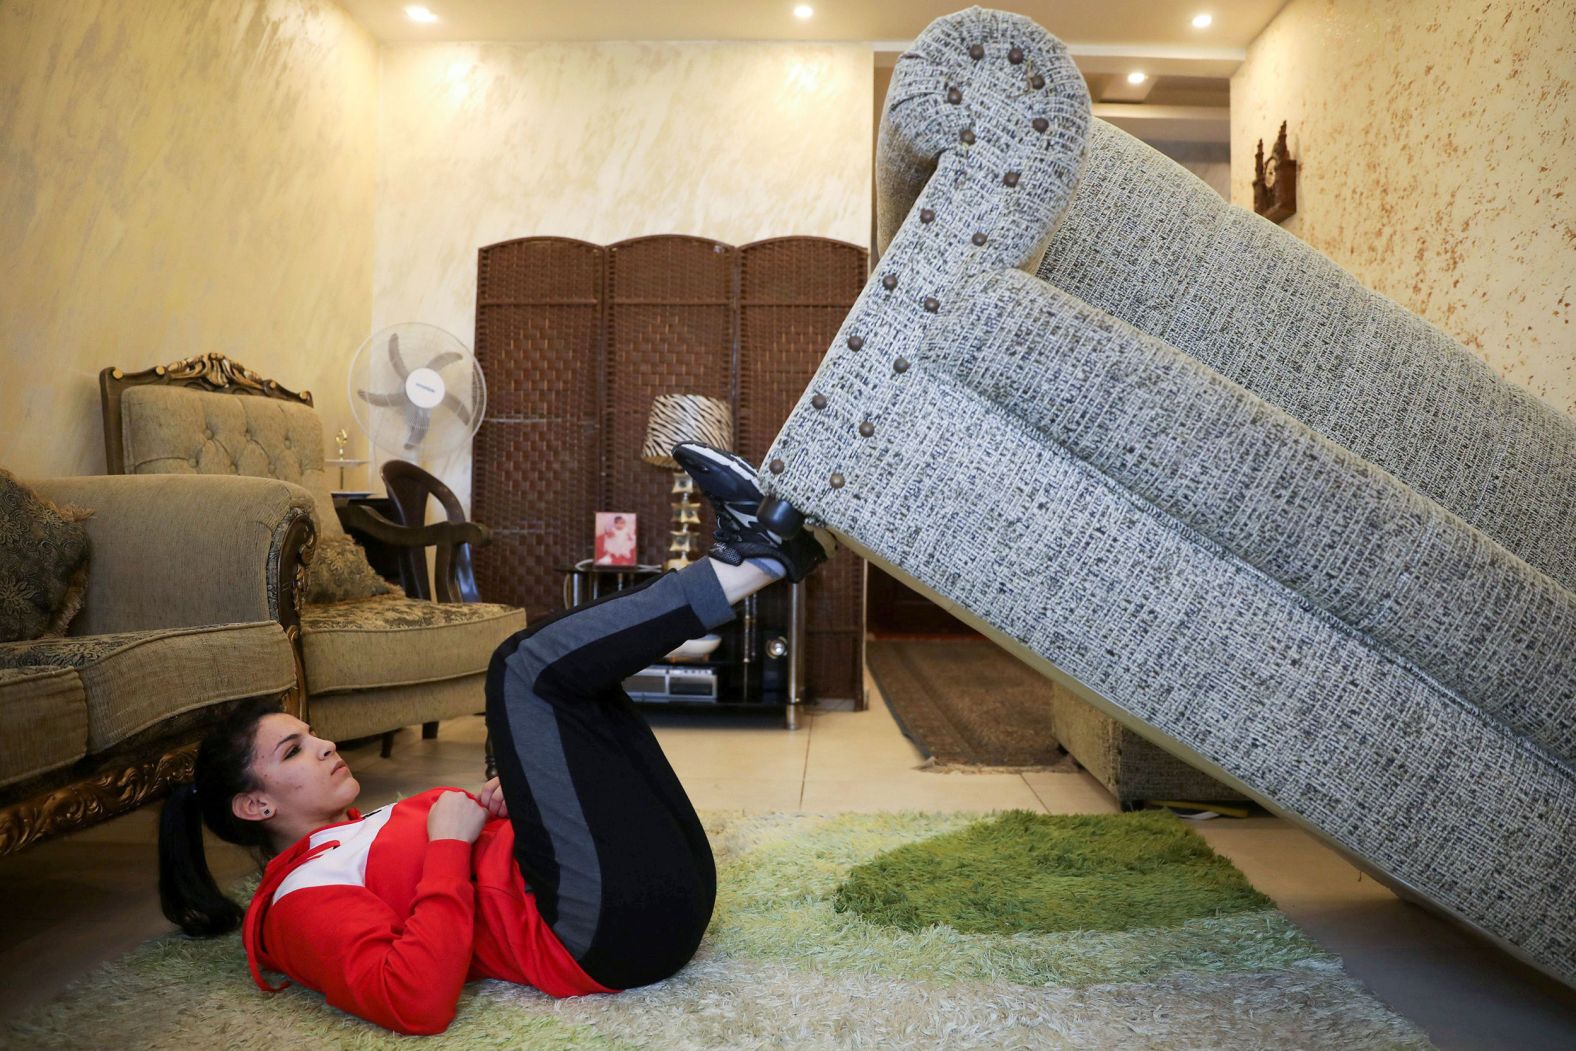 Hadeel Alami, a judo practitioner and Olympic hopeful, trains with her sofa in Amman, Jordan, on April 9.